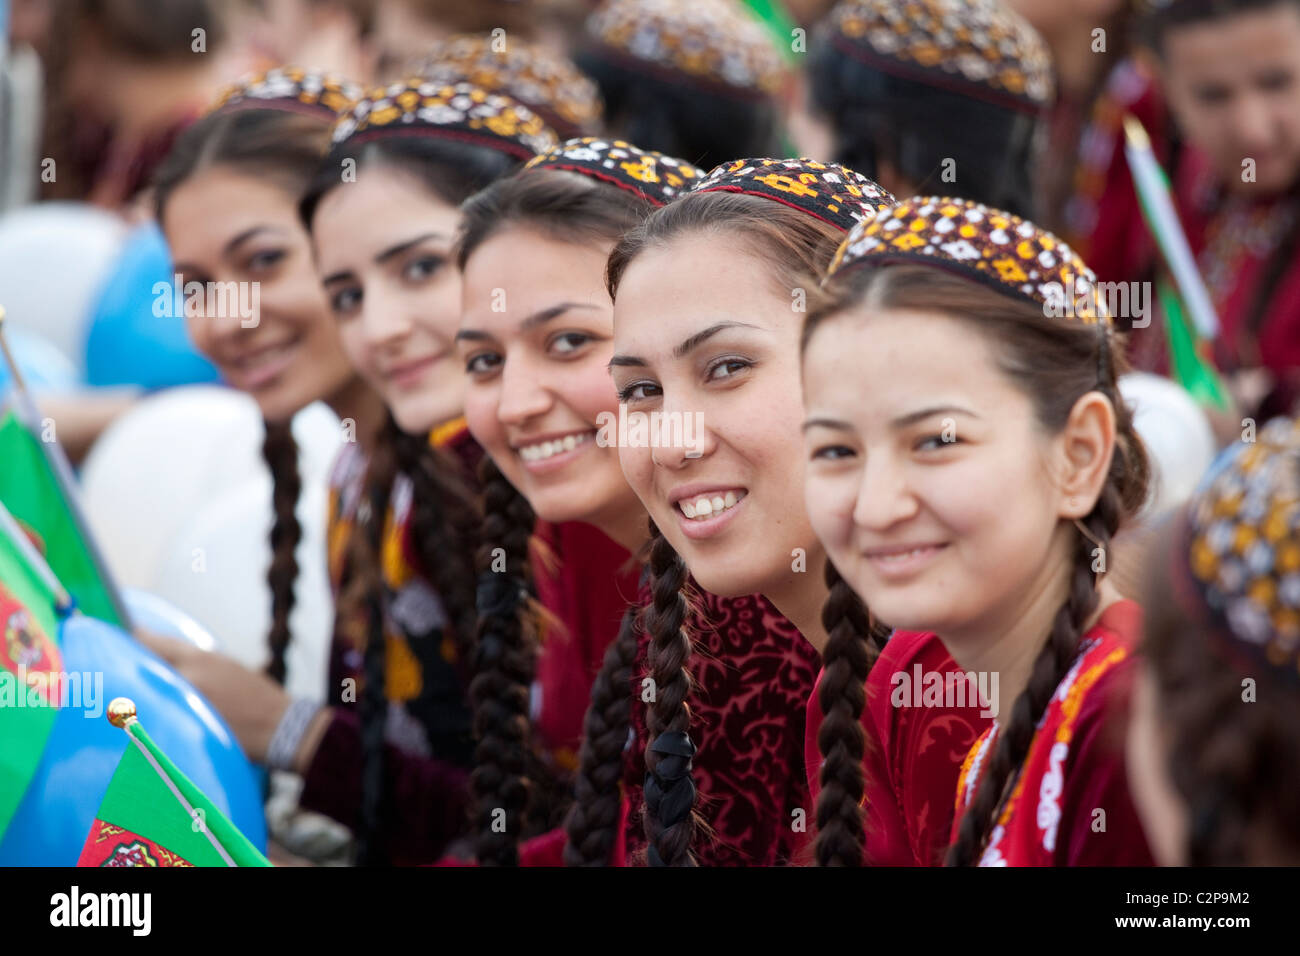 Girls in the traditional national dress of Turkmenistan Stock Photo